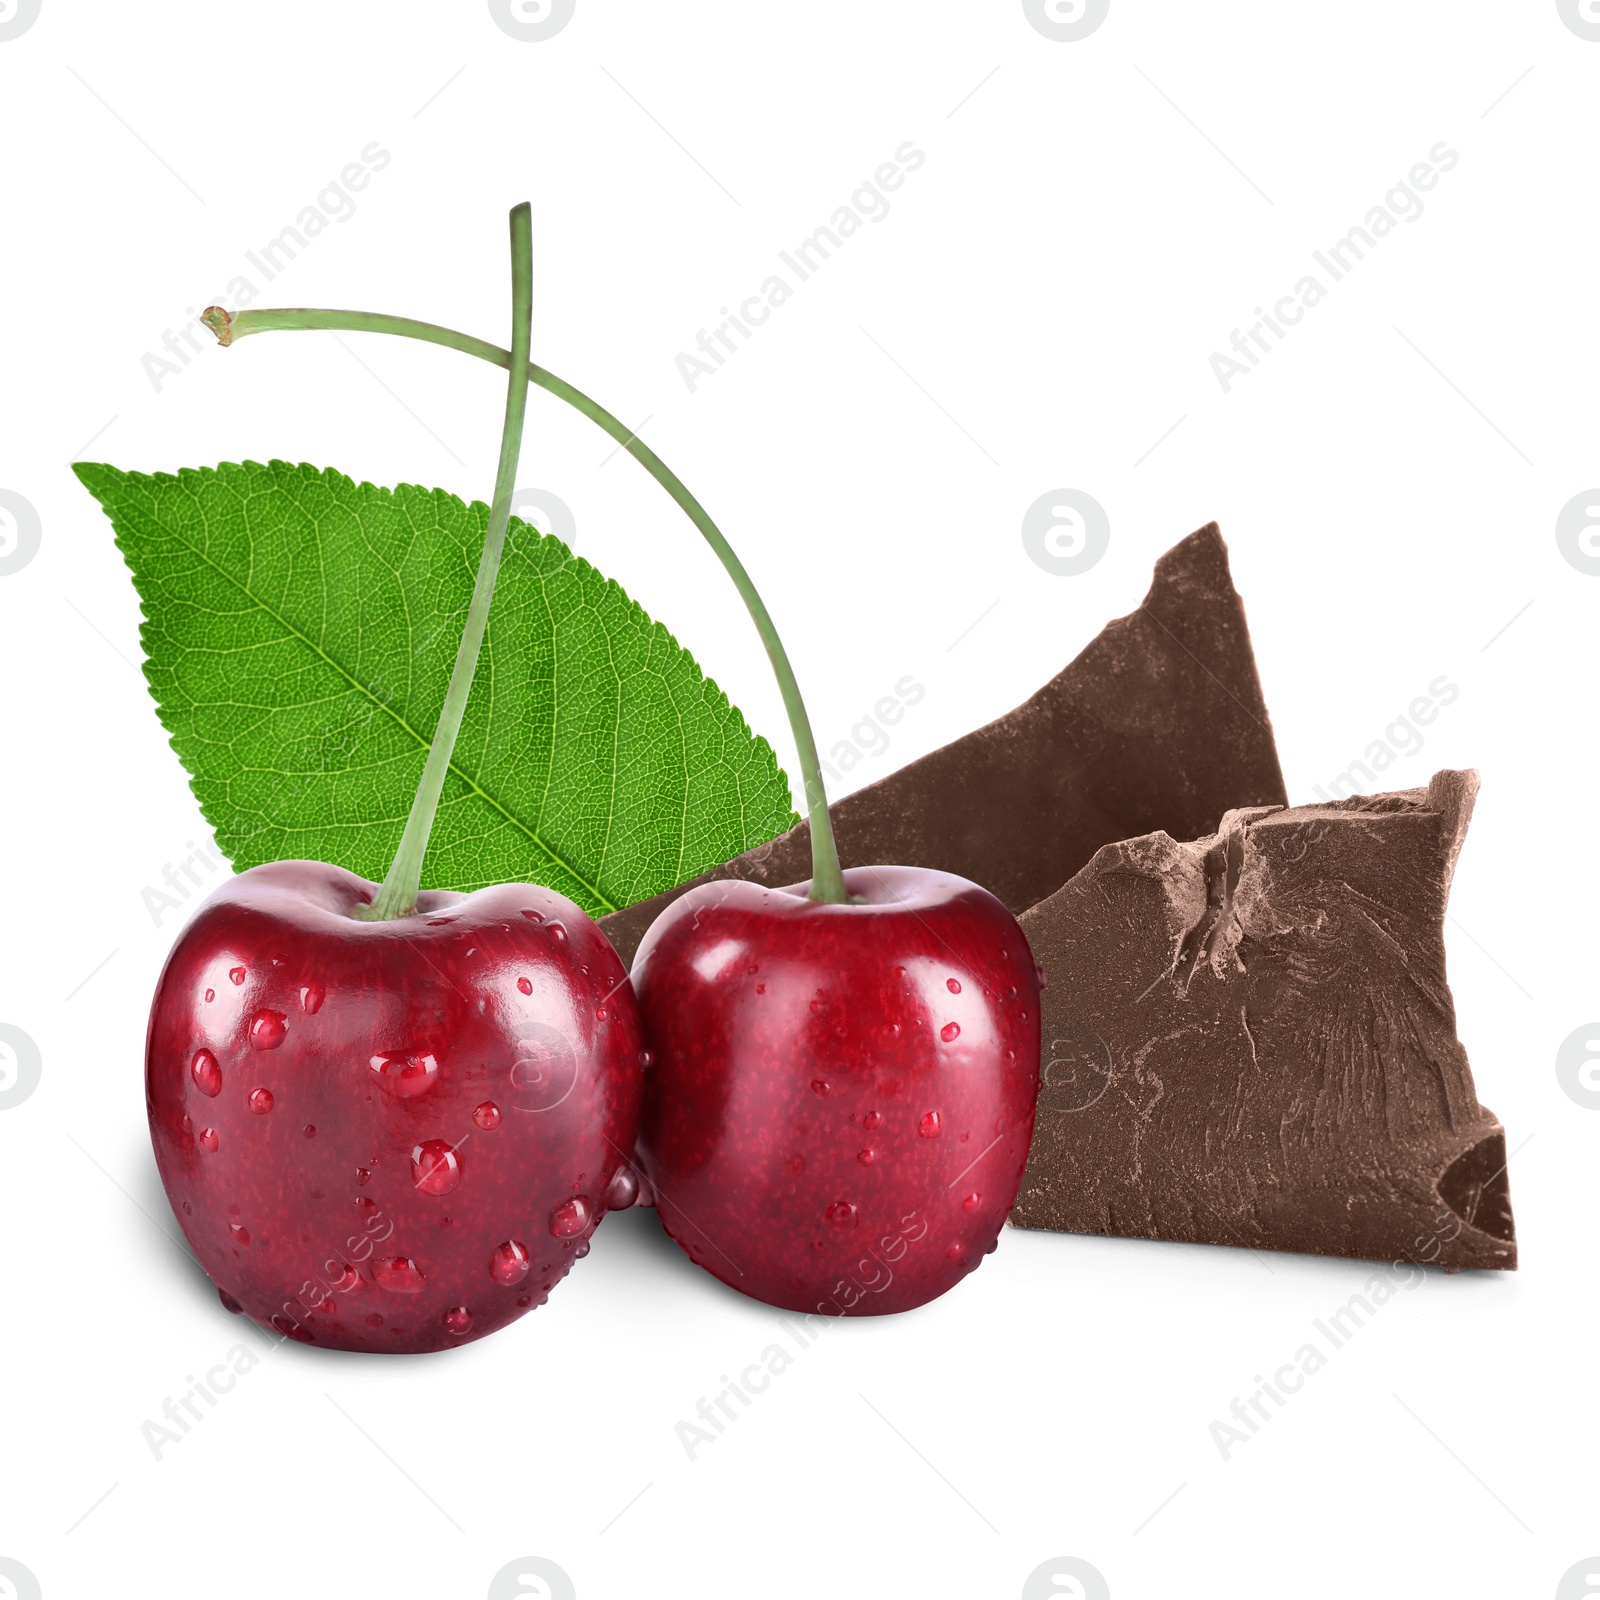 Image of Fresh cherries and pieces of dark chocolate isolated on white